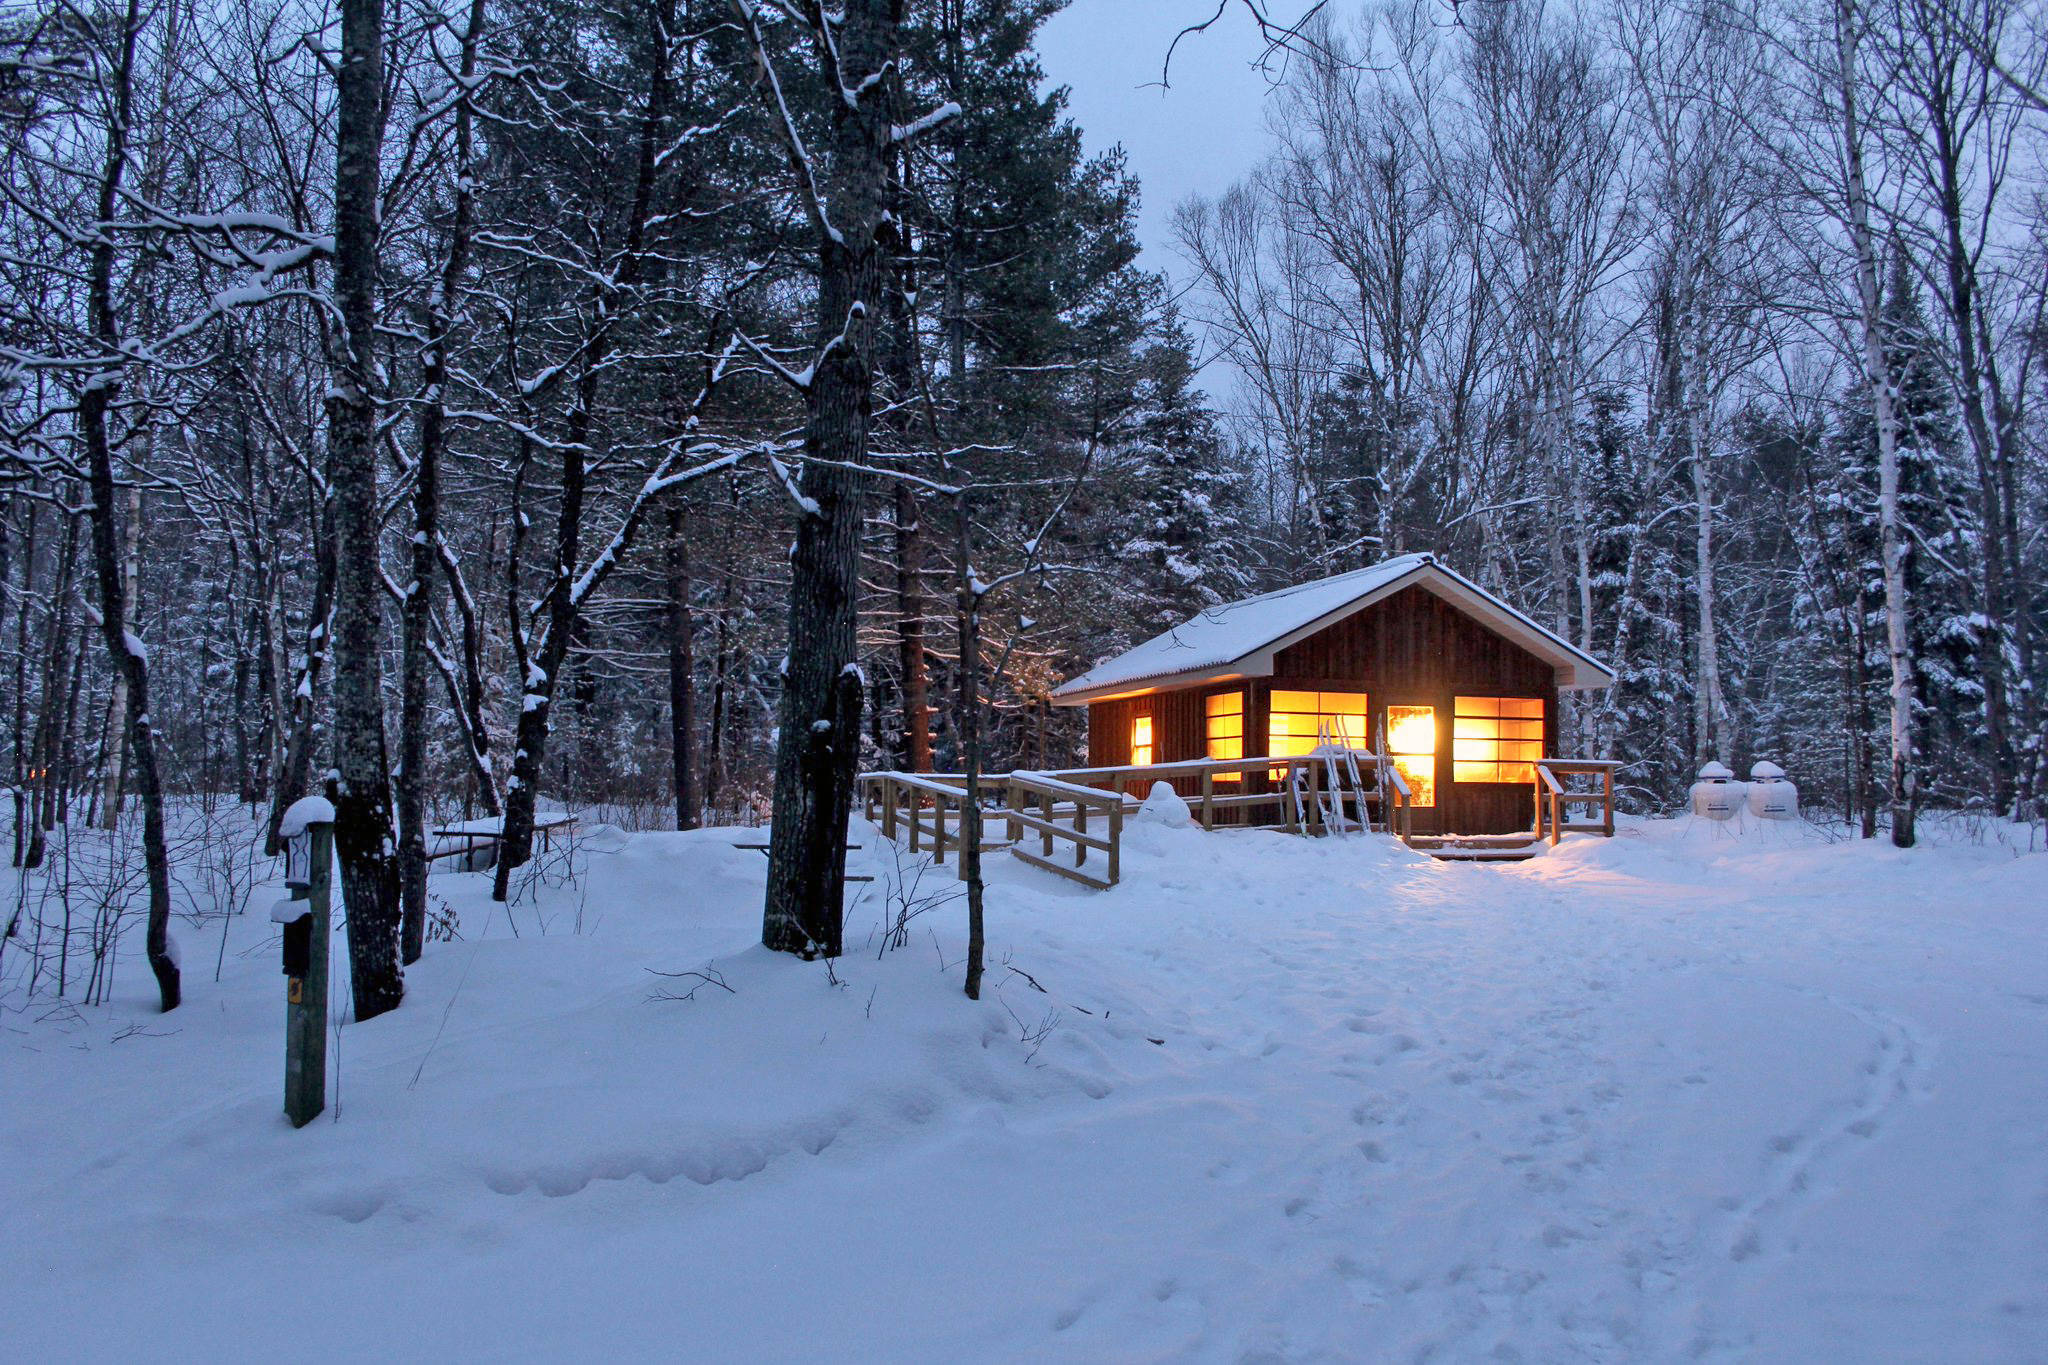 This park is the ultimate winter camping destination in Ontario